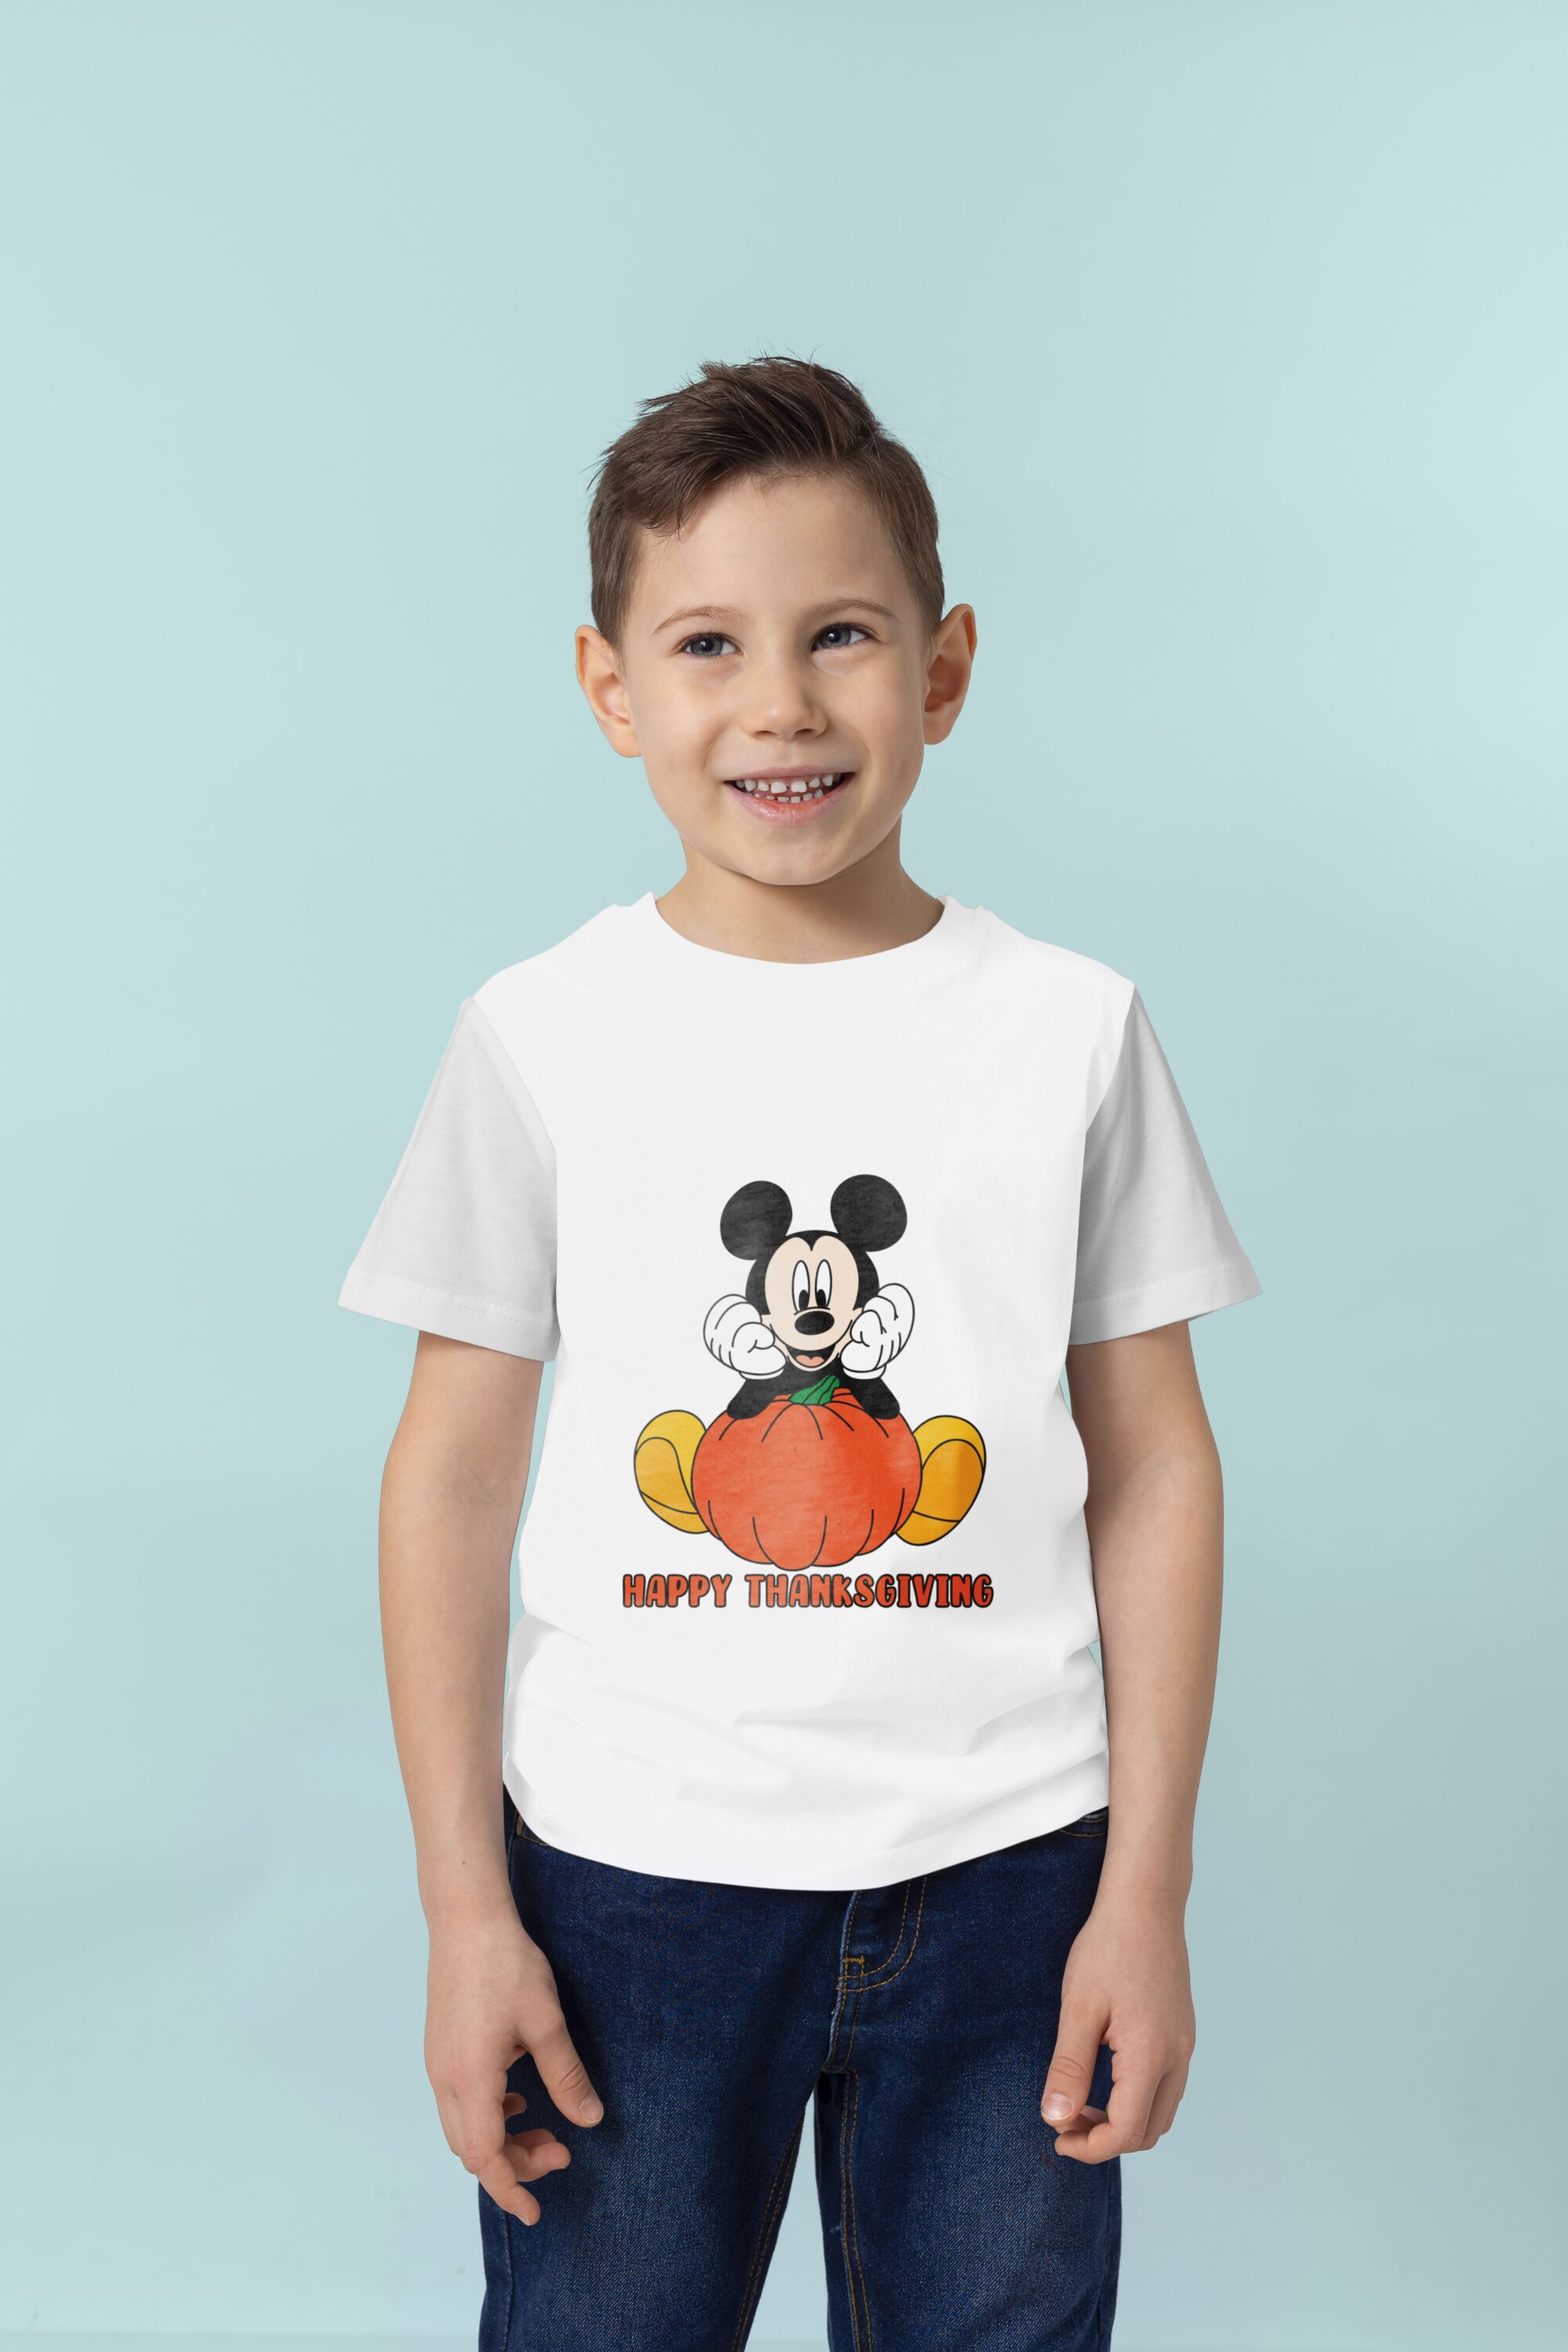 Add the disney vibe to your brand.